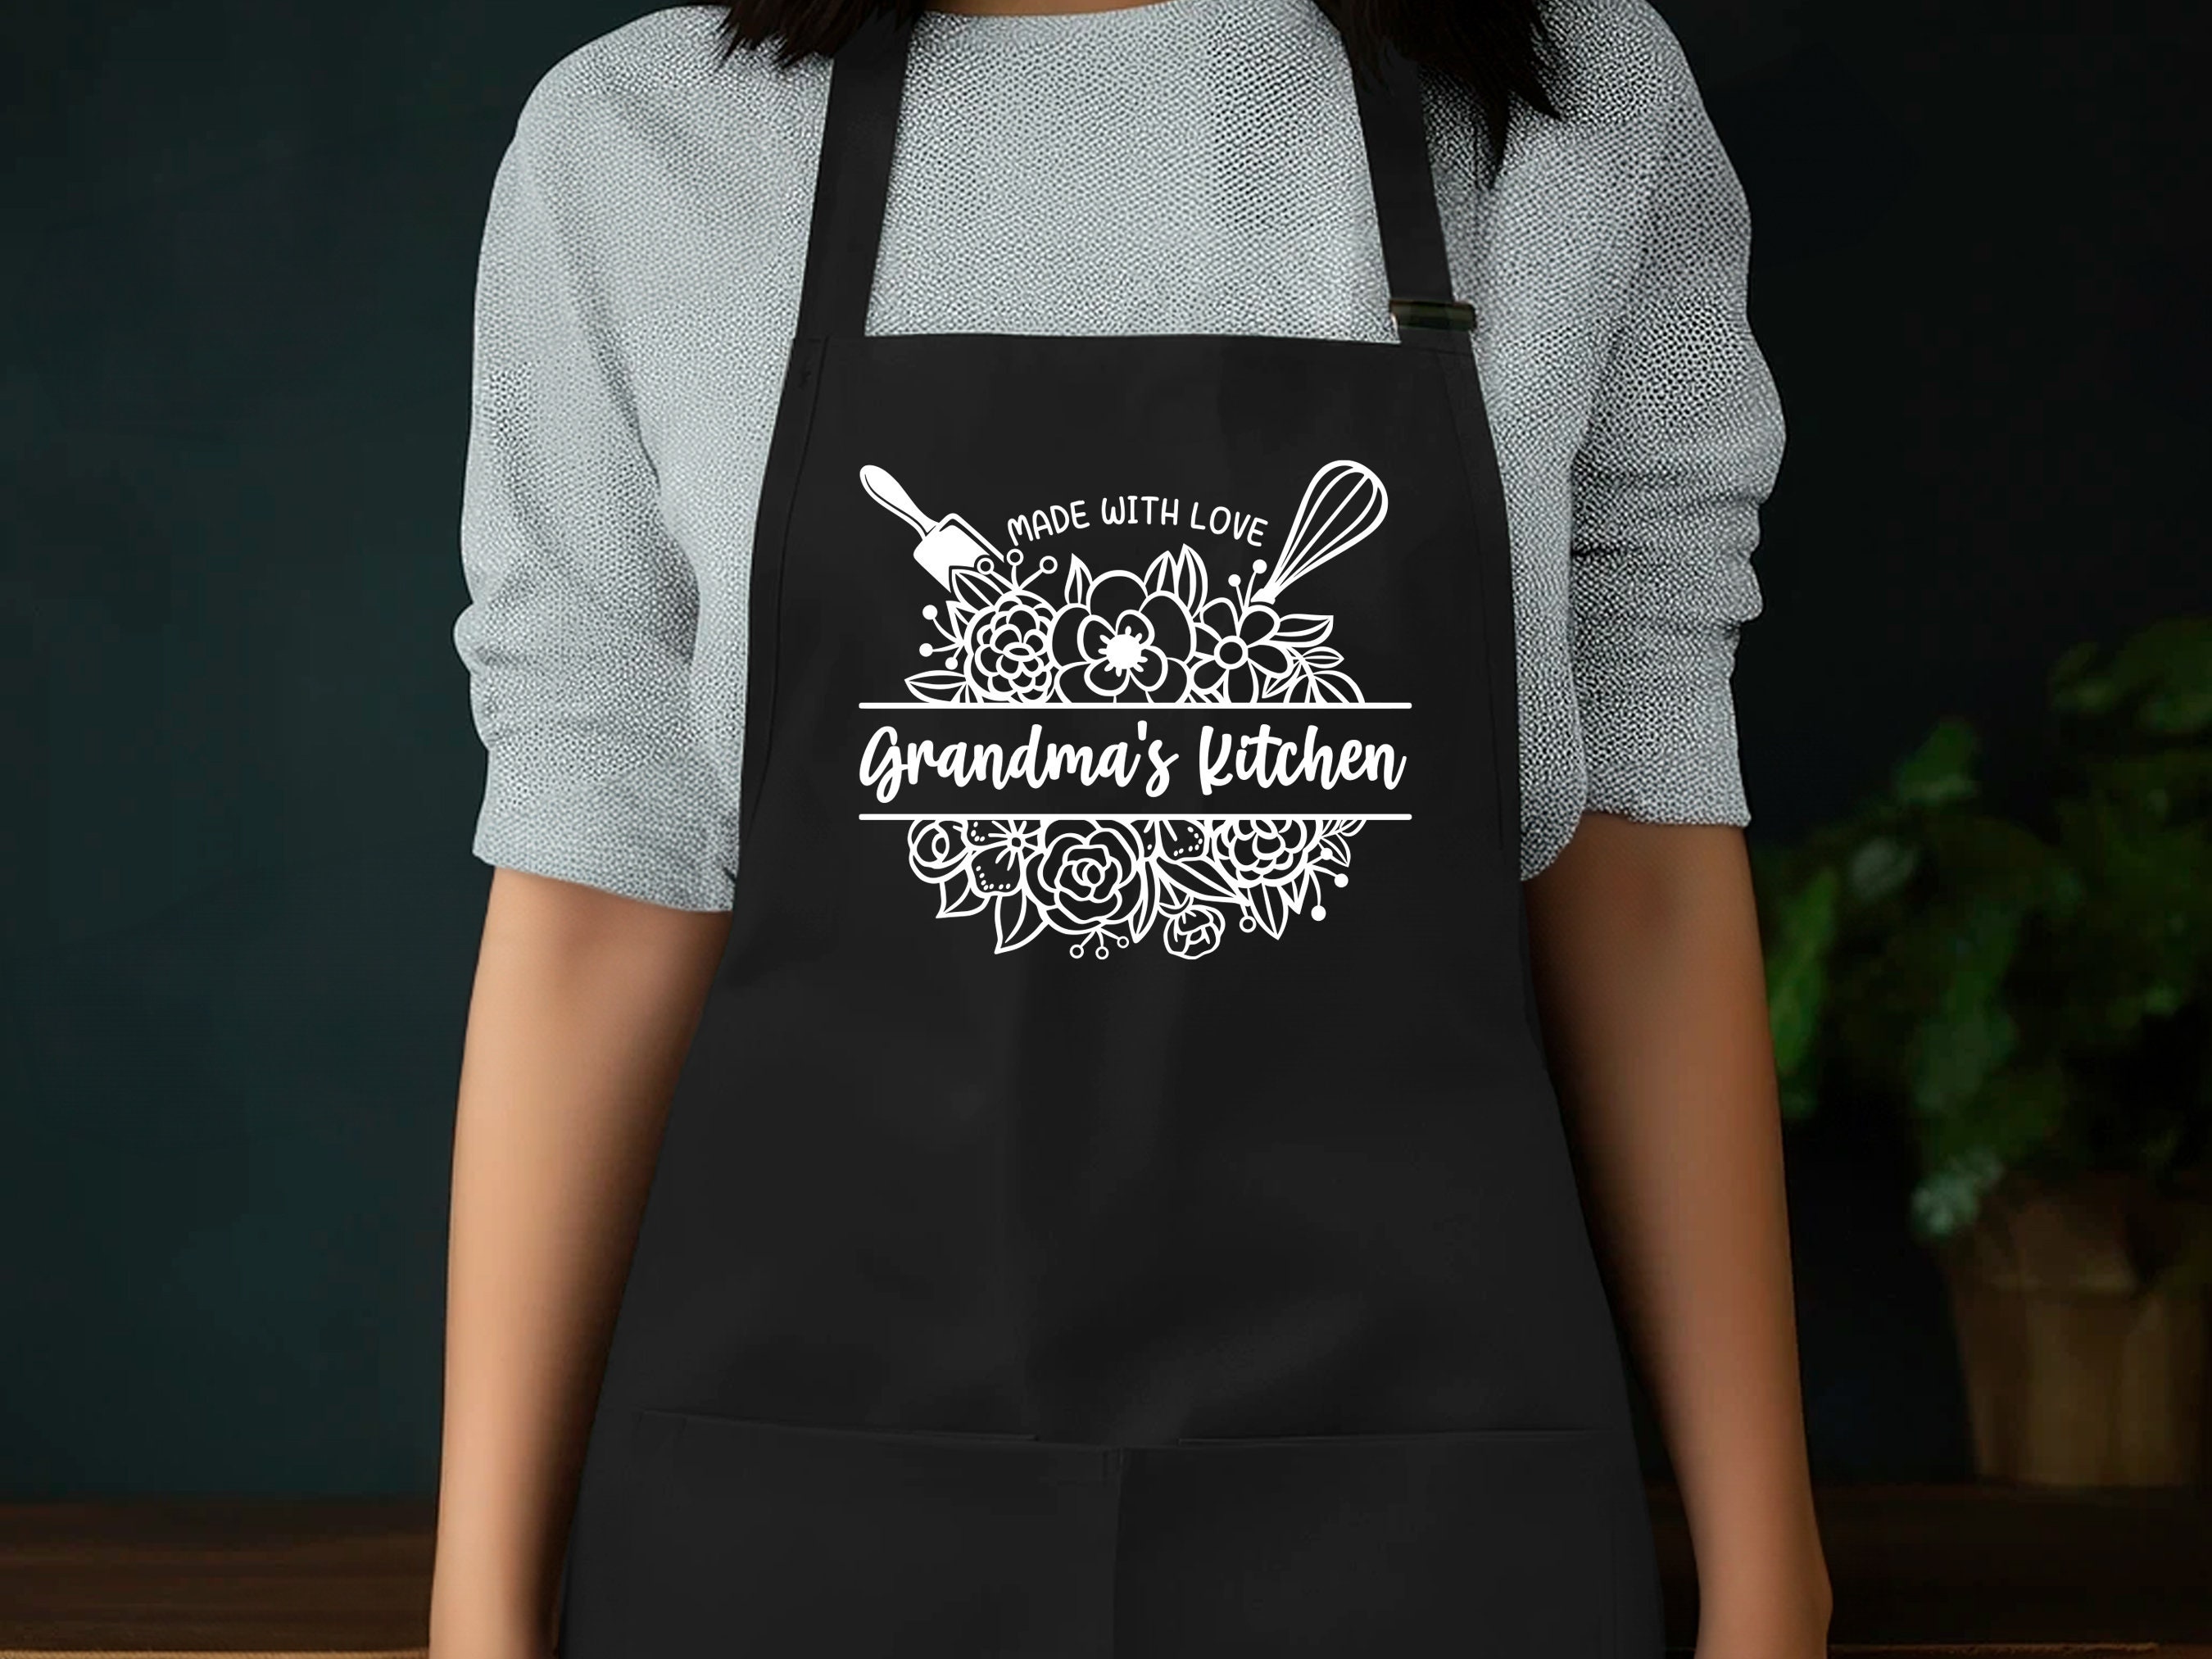 Discover Personalized Apron For Women, Personalized Apron, Mothers Day Gift, Kitchen Apron, Gift For Mom, Gift For Grandma, Gift for Her, Cute Apron